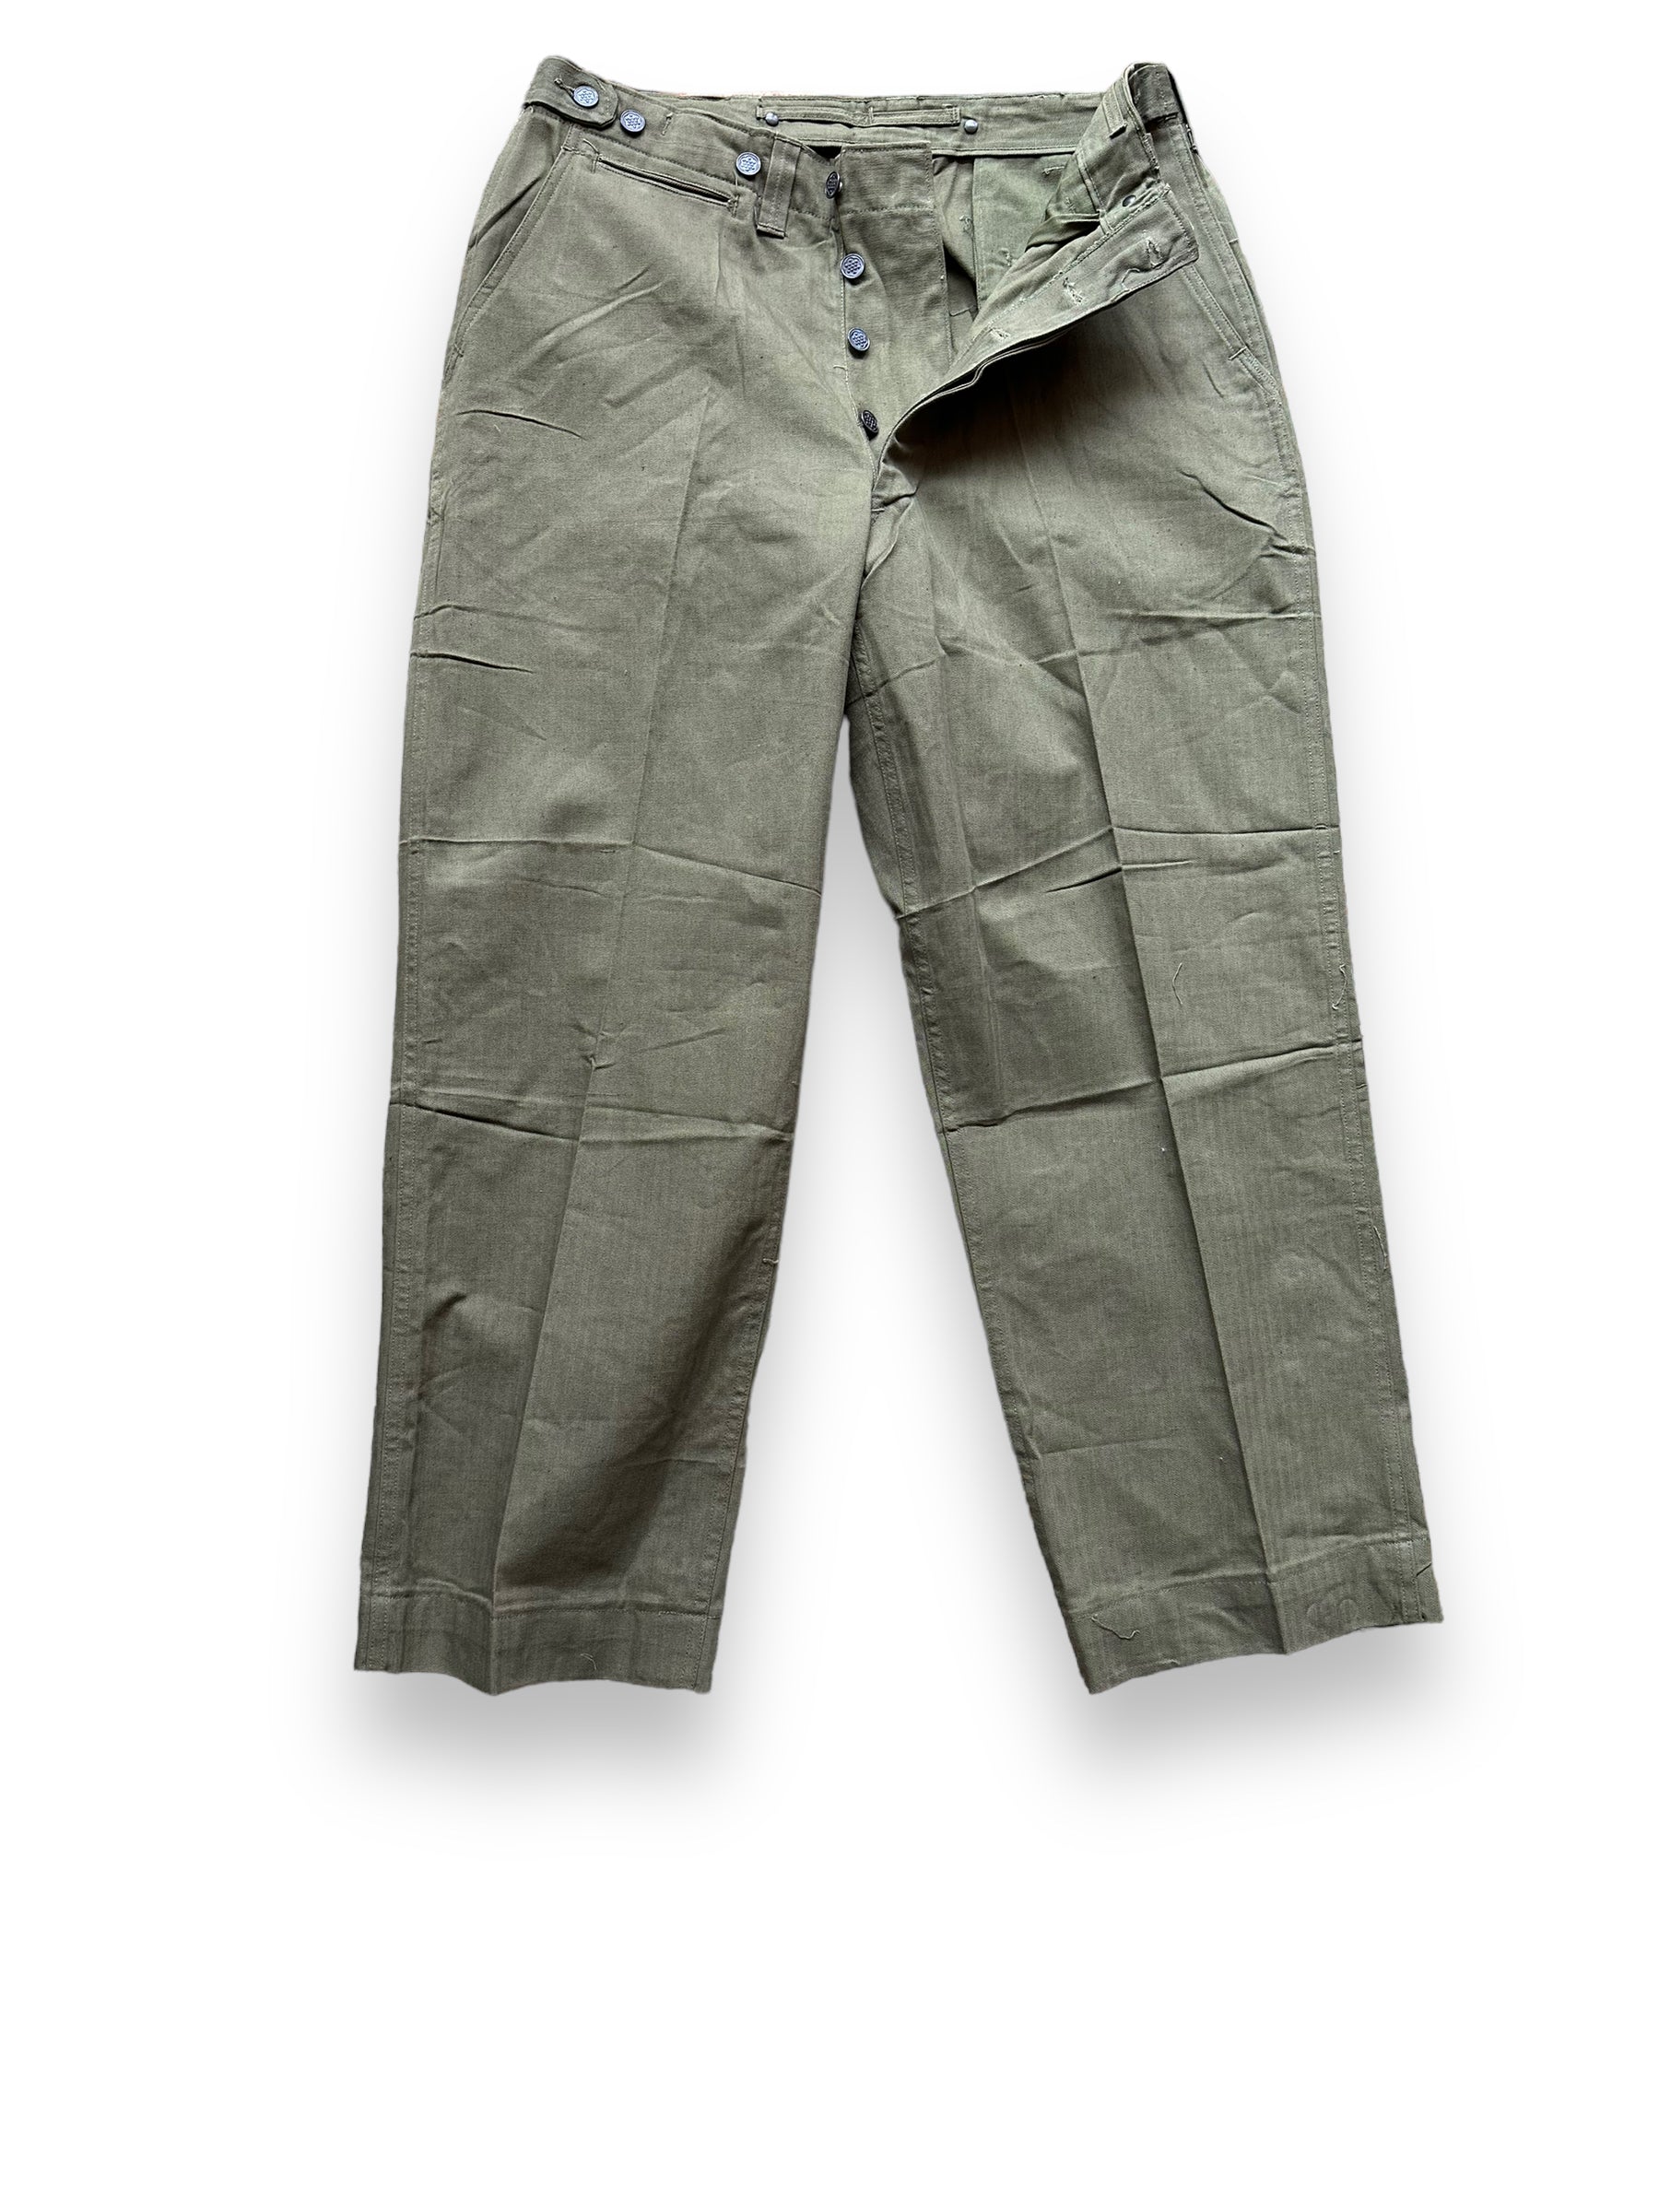 Unbuttoned Front View of Vintage WWII M-43 HBT Field Cotton Trousers Olive Drab W34 | Barn Owl Vintage Seattle | Vintage Military Trousers Seattle